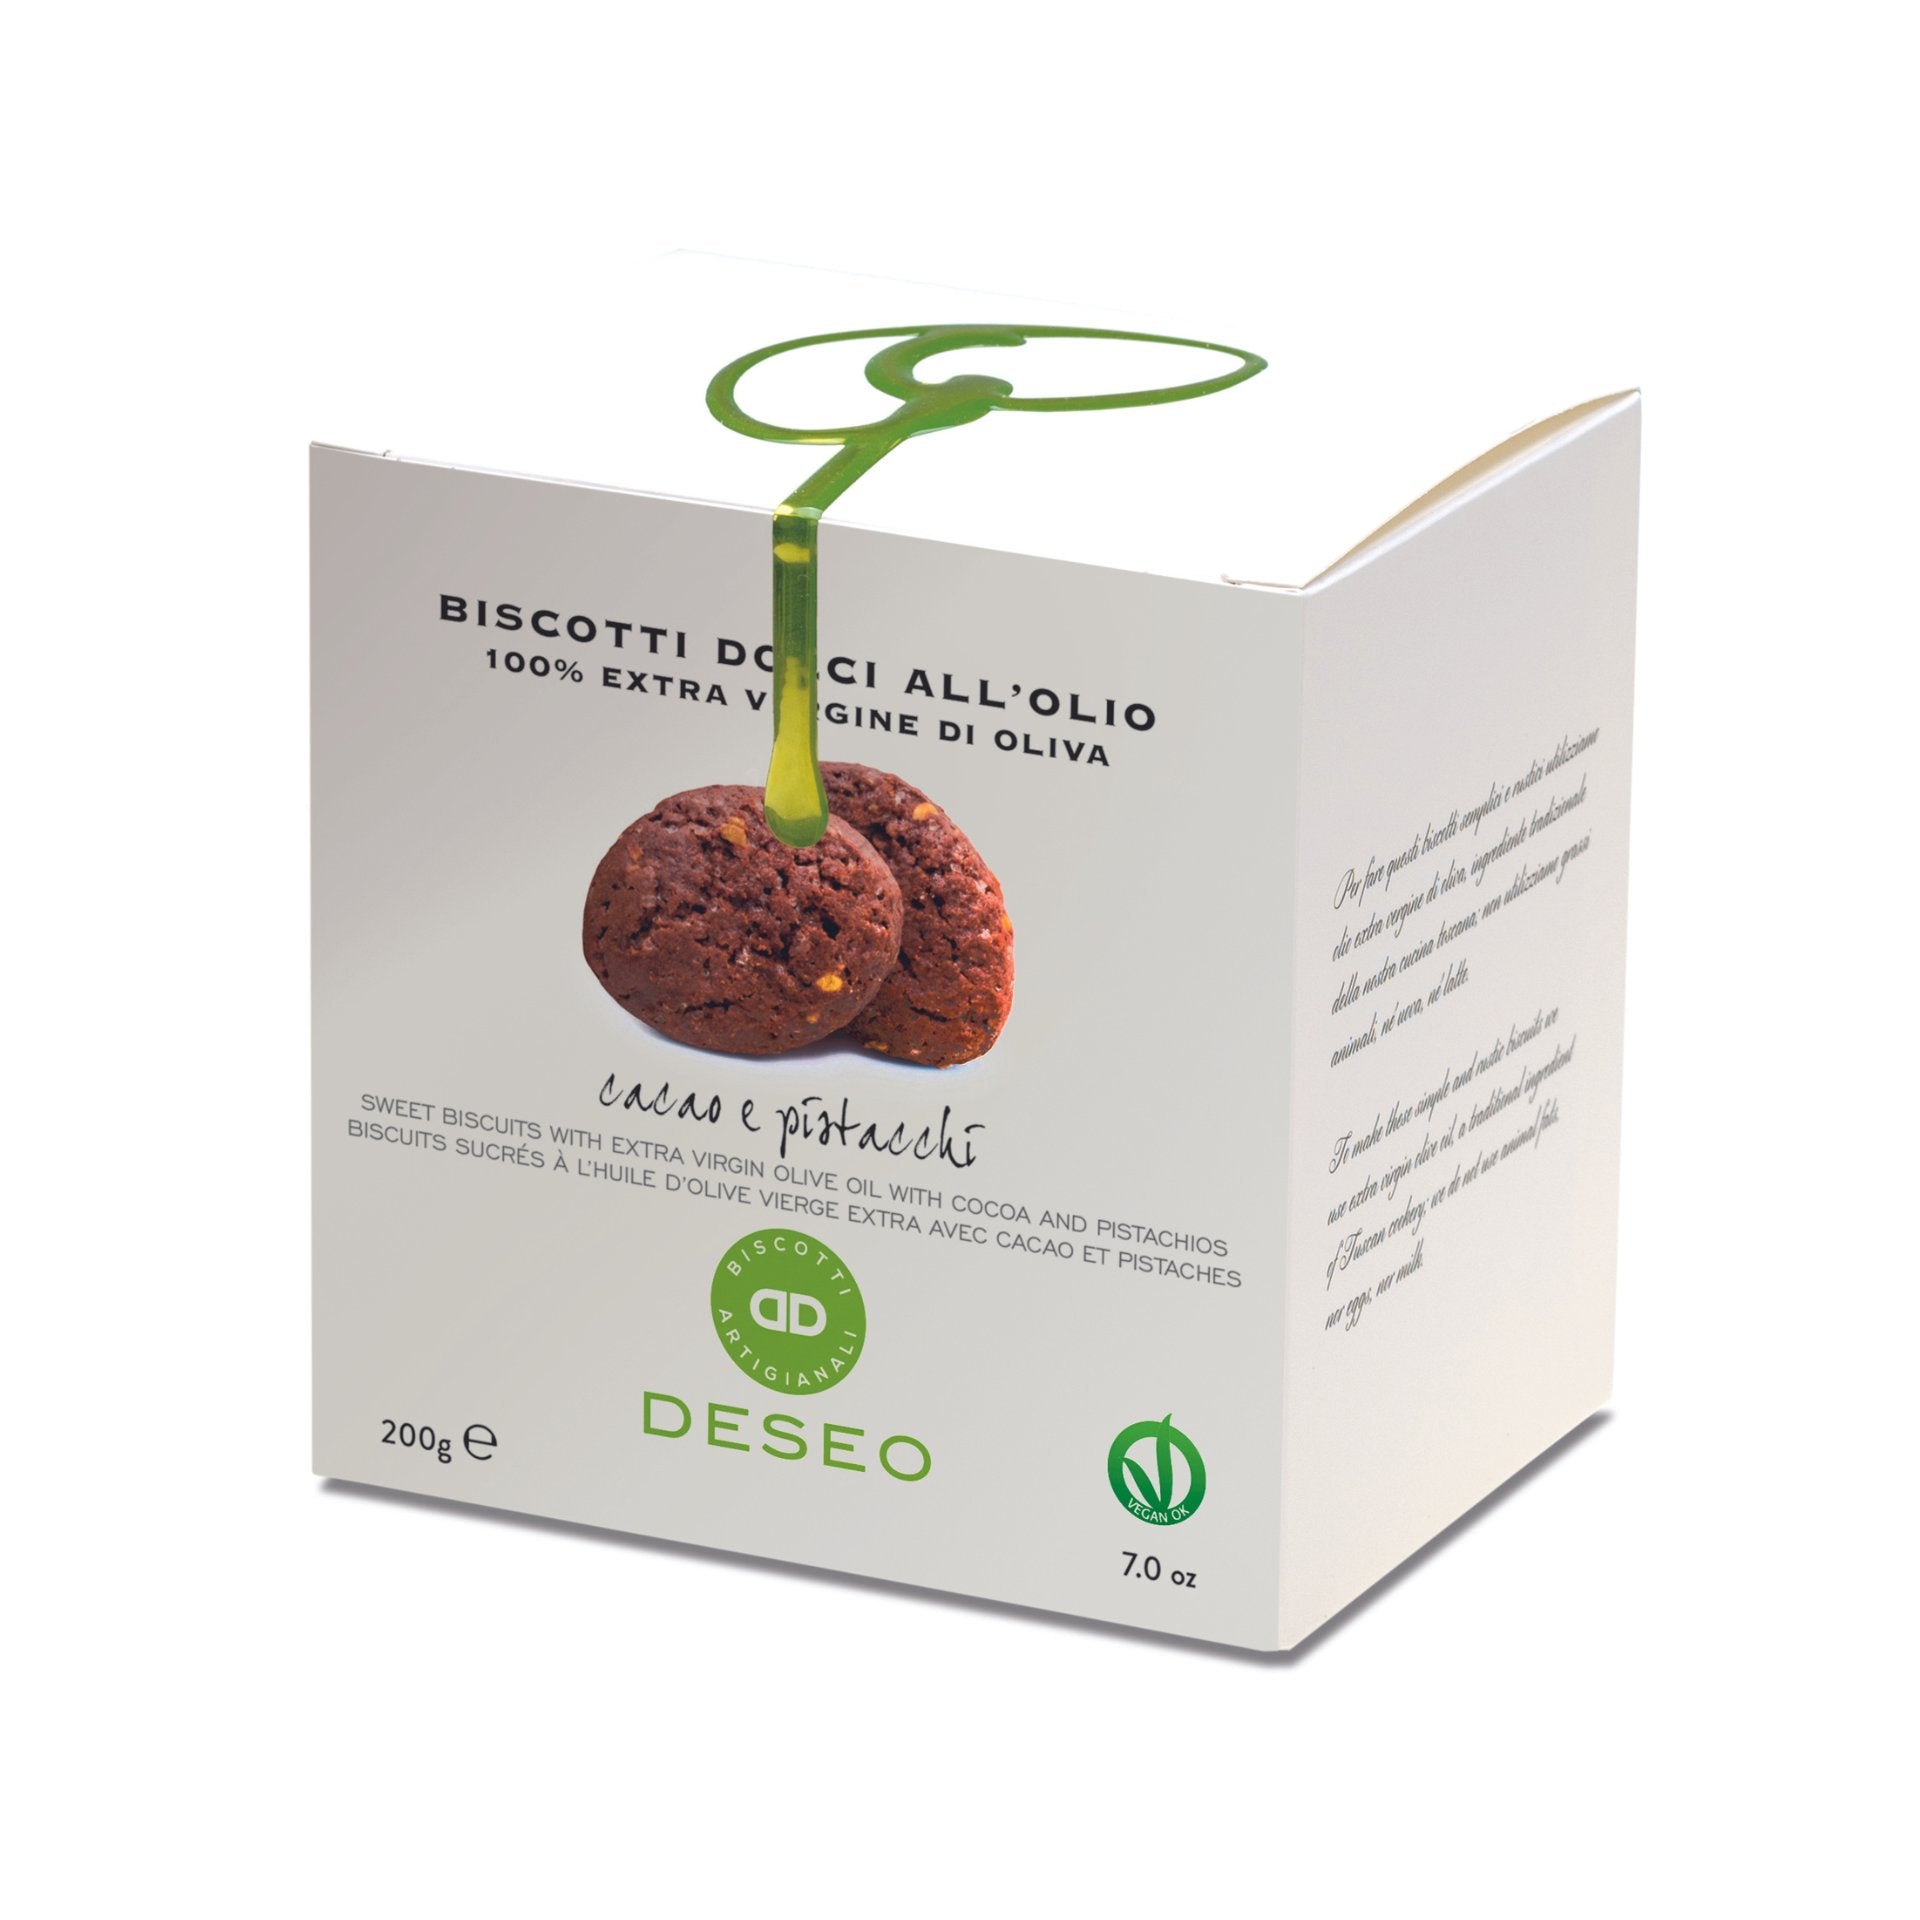 Deseo Sweet Biscuits with Cocoa, Pistachio & Extra Virgin Olive Oil 200g (Box)  | Imported and distributed in the UK by Just Gourmet Foods